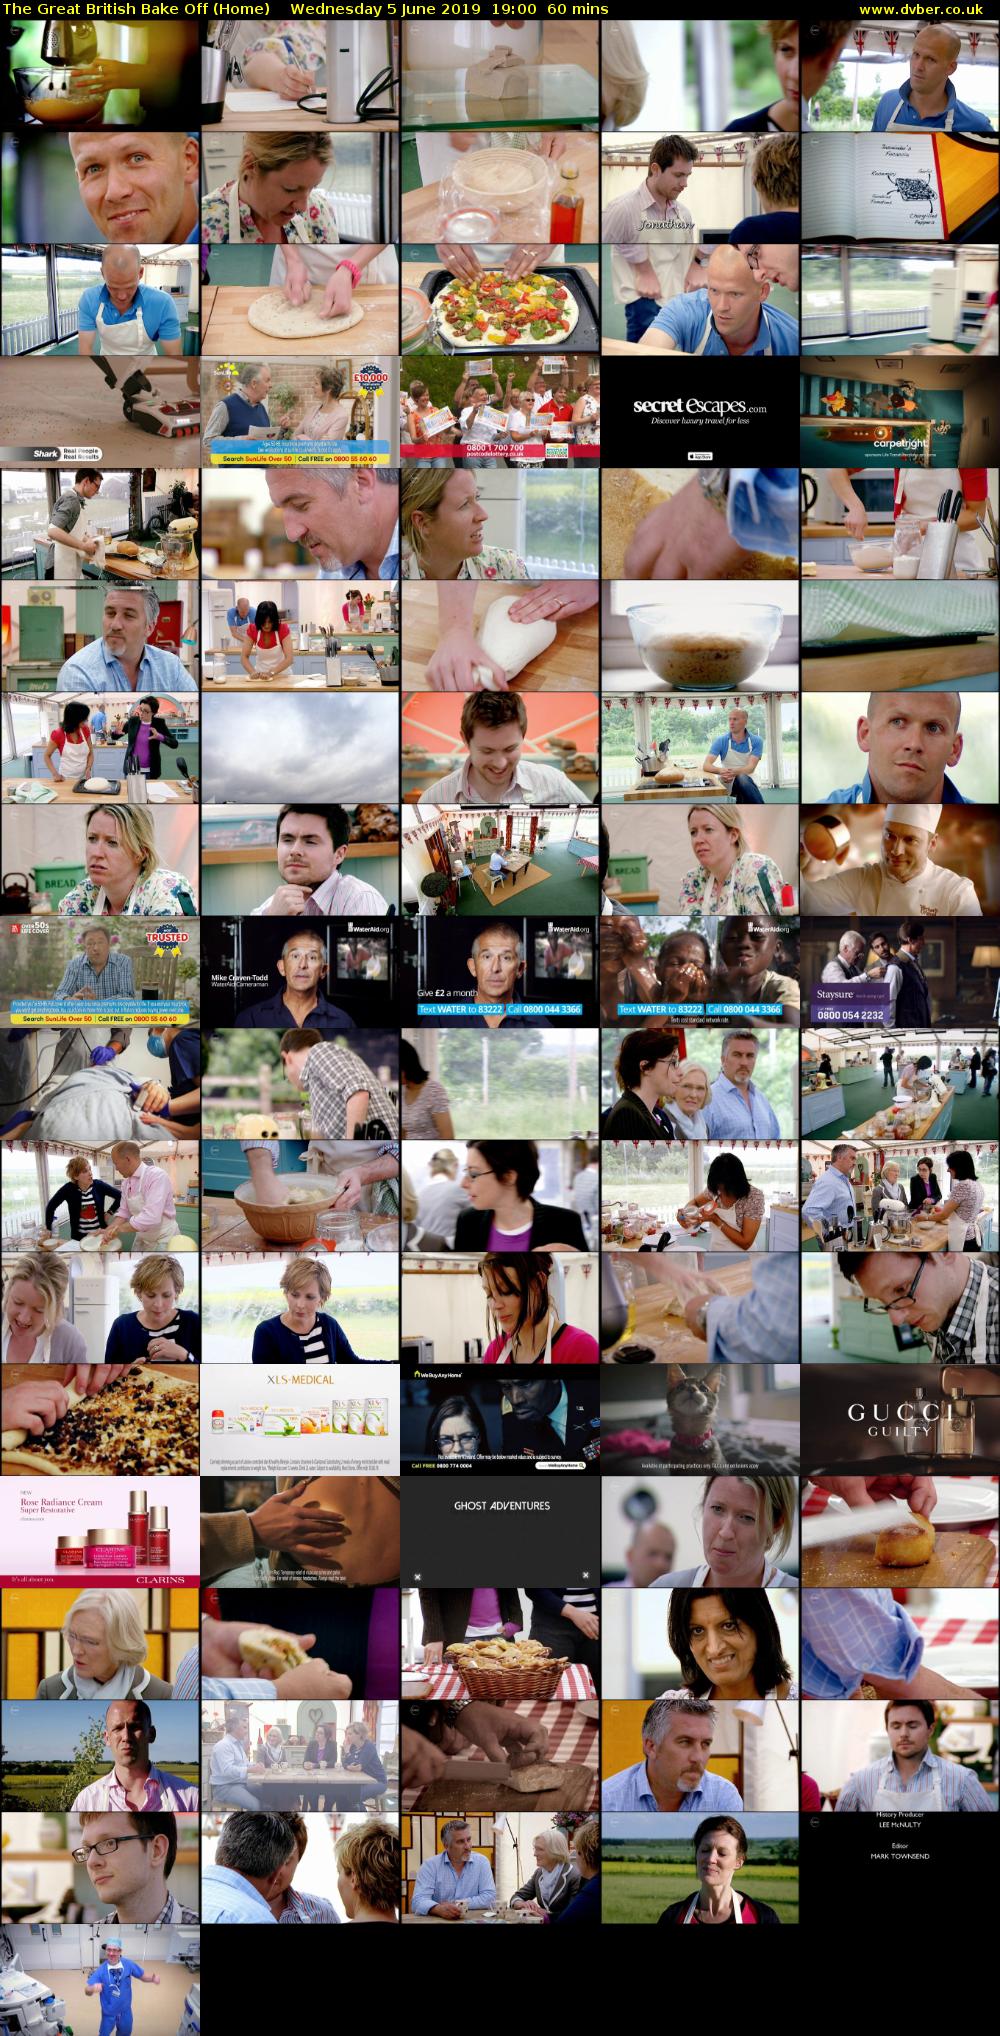 The Great British Bake Off (Home) Wednesday 5 June 2019 19:00 - 20:00